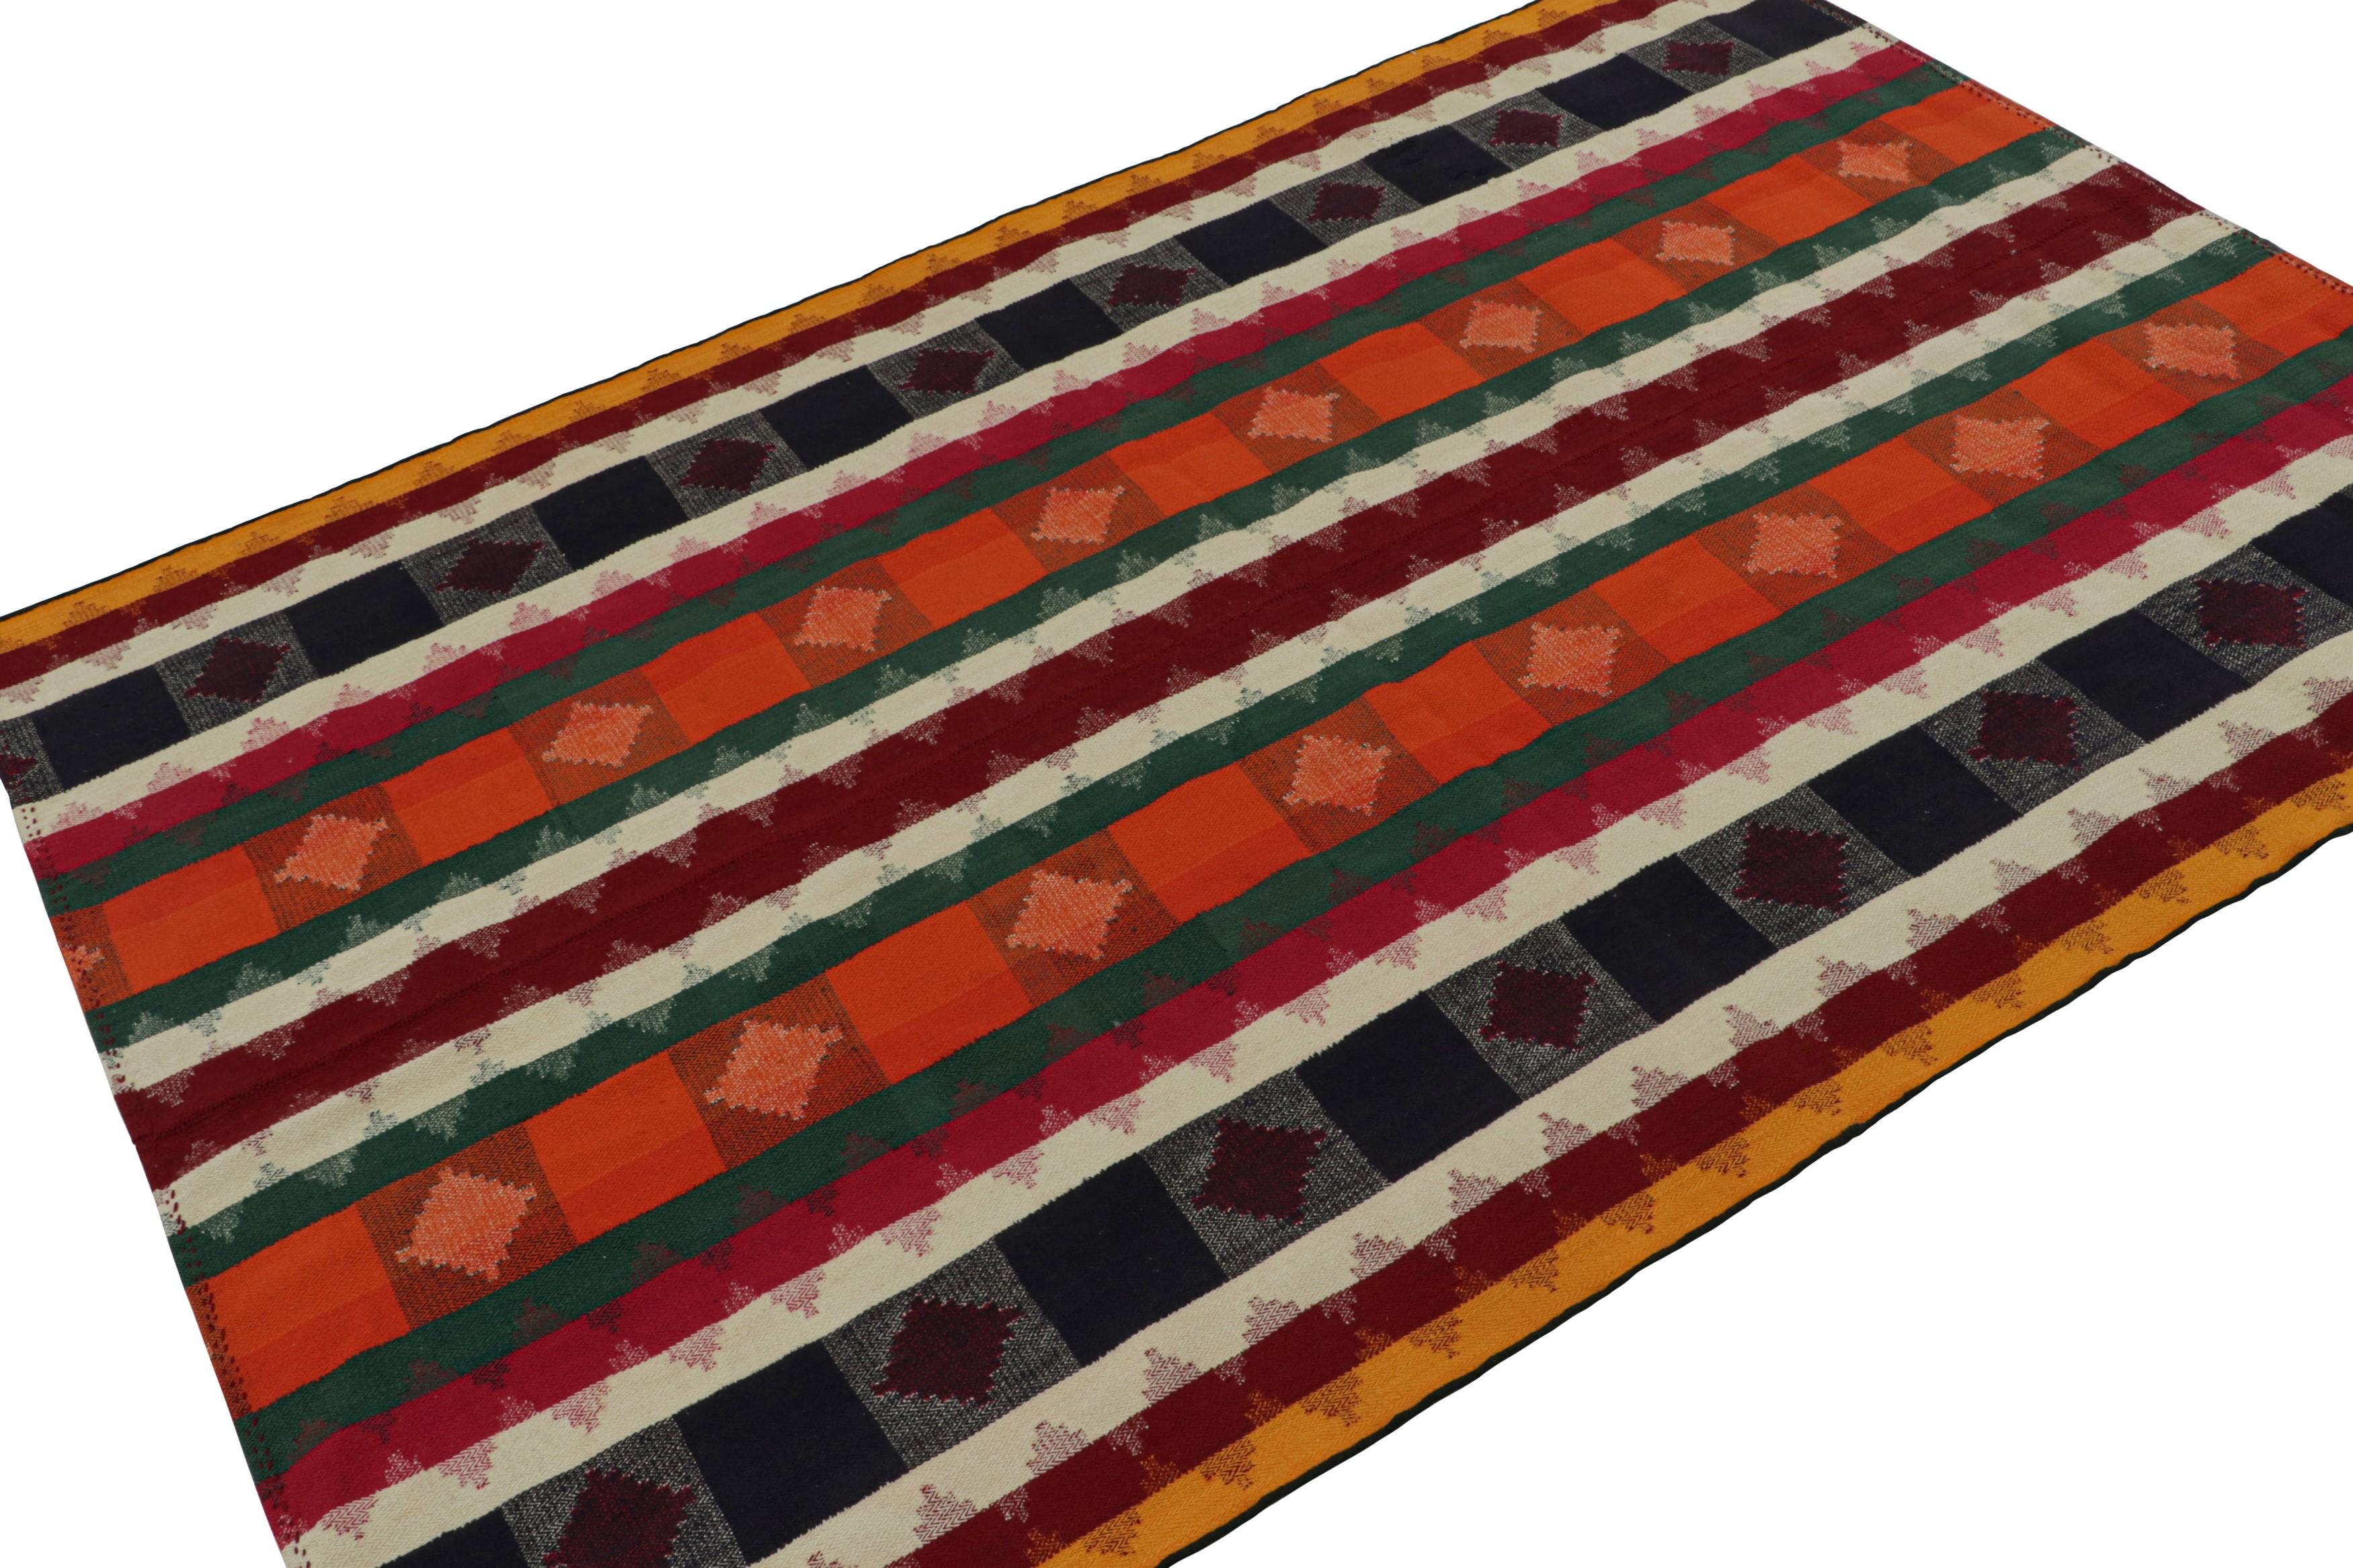 Handwoven in wool, circa 1950-1960, this 5x7 vintage Afghan tribal kilim rug, is a quintessential tribal Kilim and a one-of-a-kind piece alike. Its design features a play of stripes and geometric patterns in its particular geometric pattern. 

On